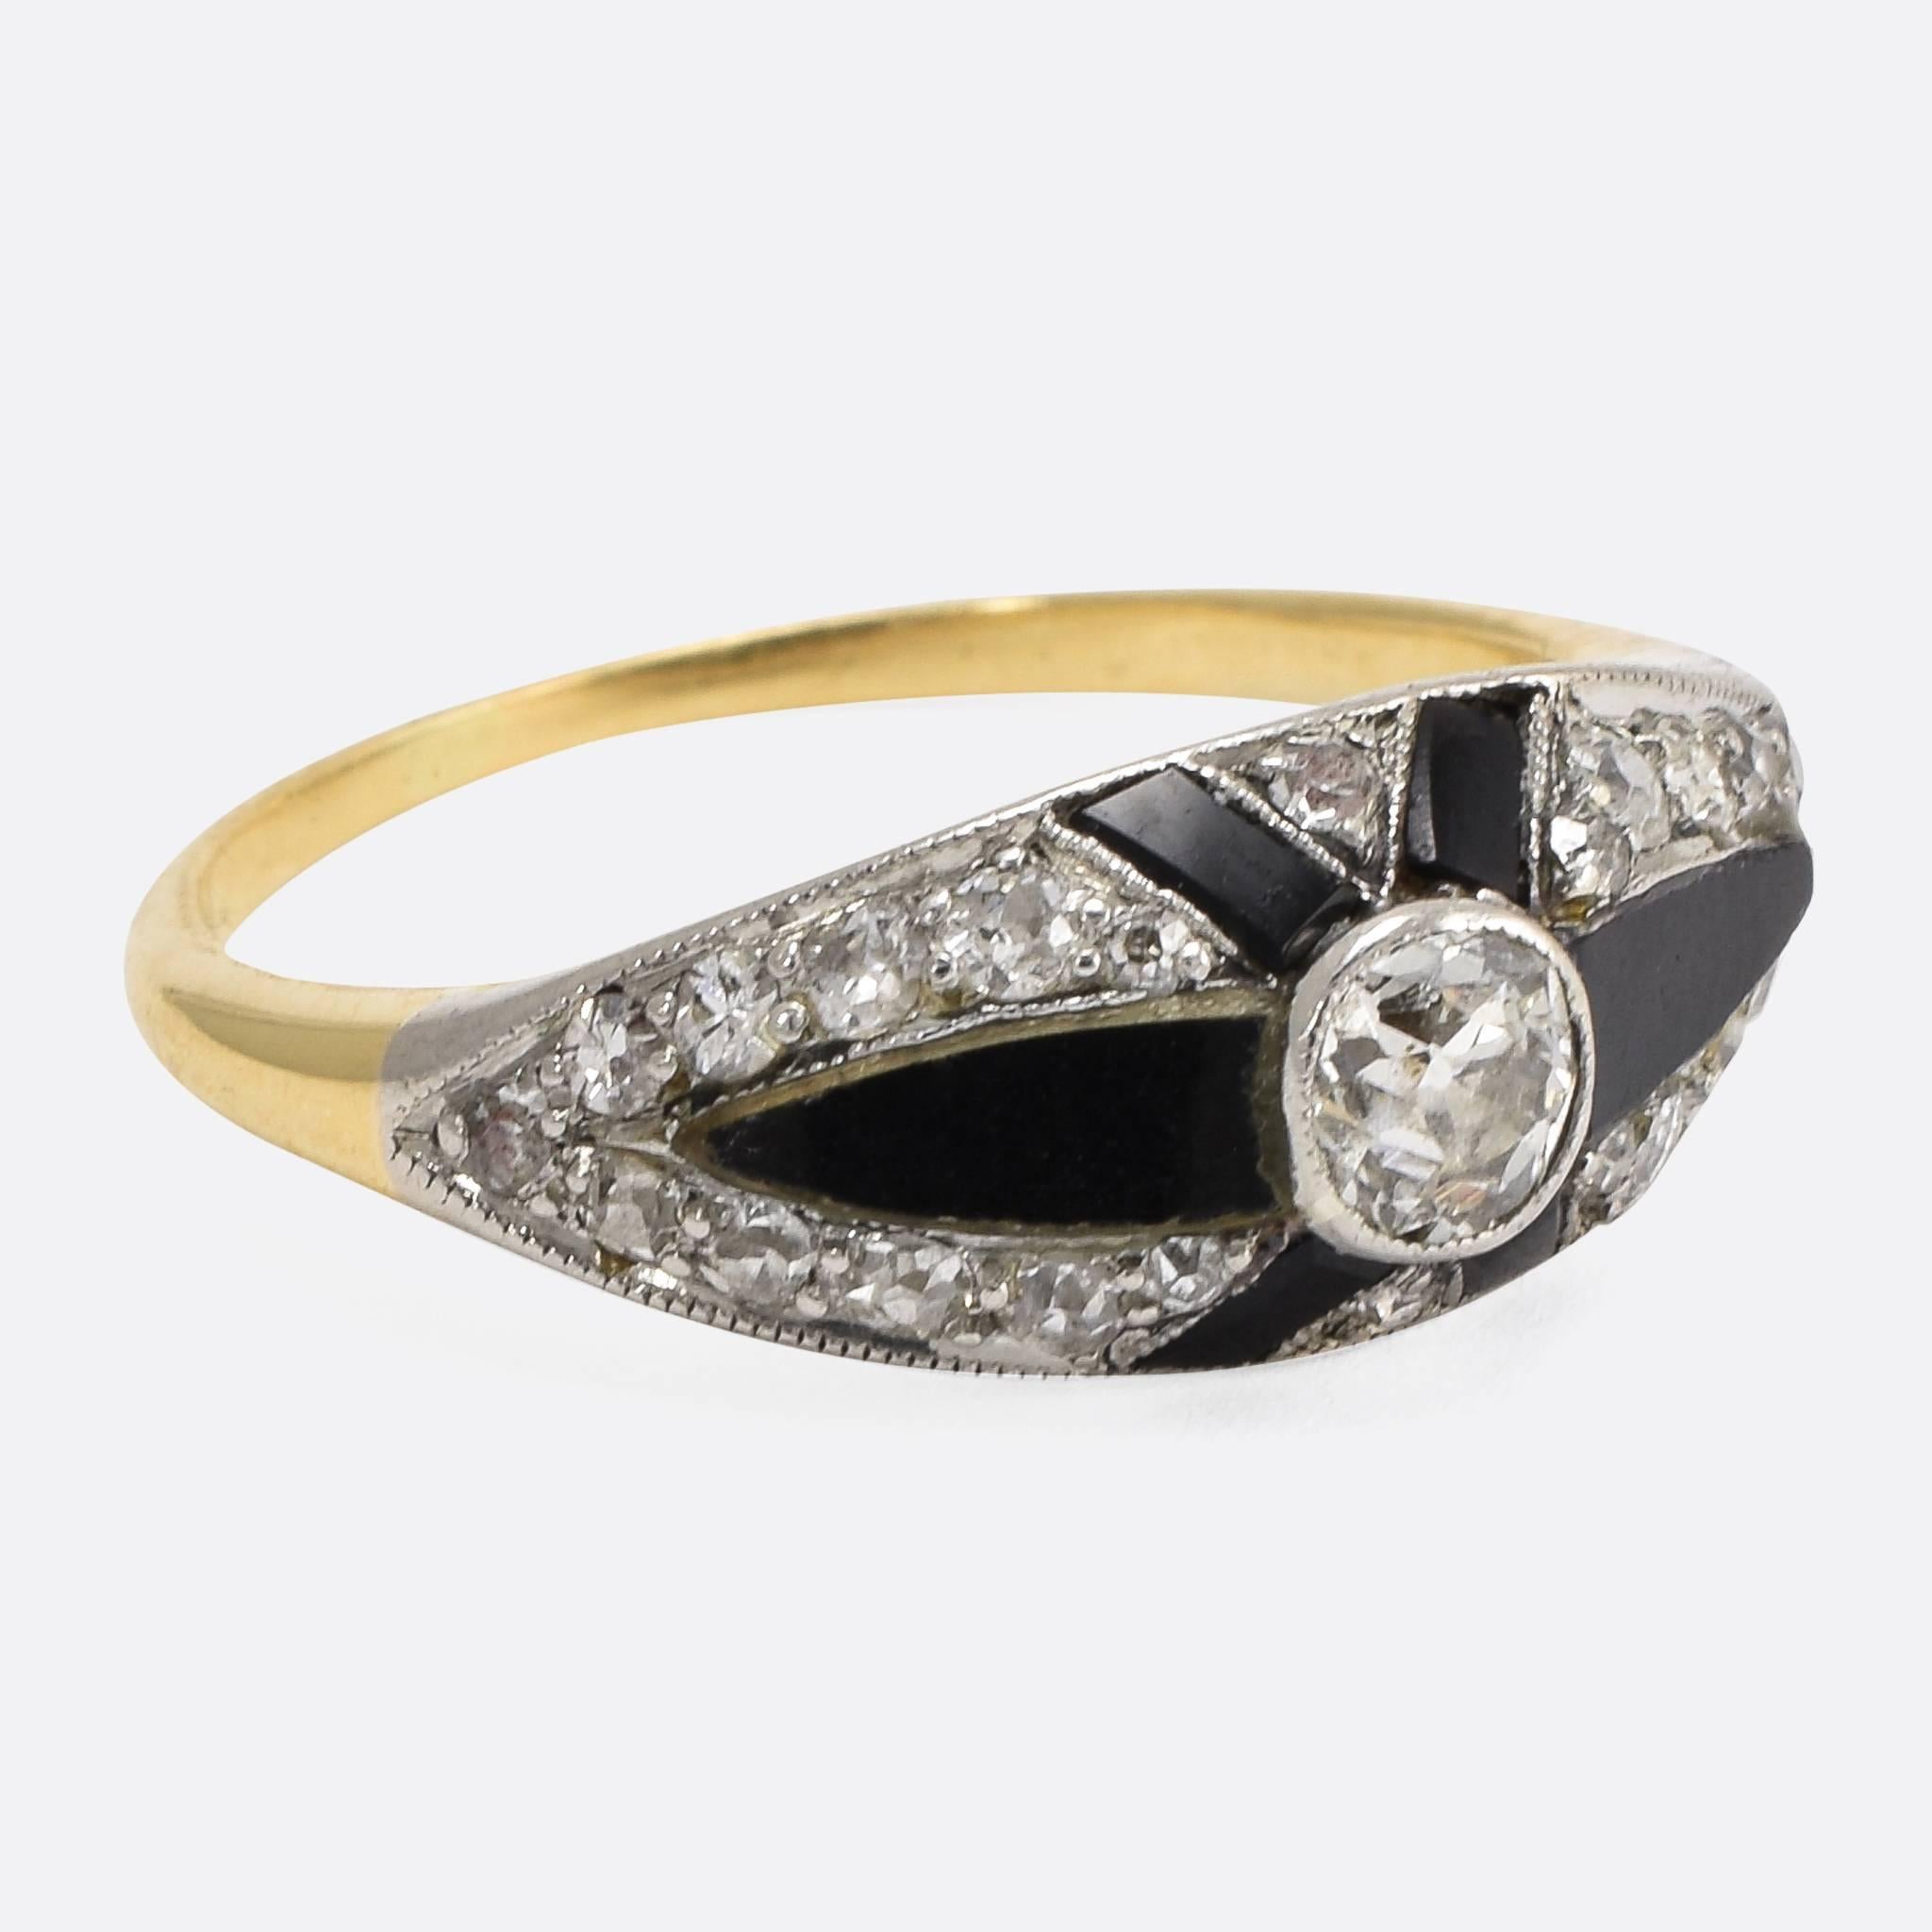 This superb Art Deco cocktail ring is set with black onyx panels, alongside a cluster of old cut diamonds and a principal .33ct cushion cut. The contrast between the onyx and diamonds is particularly striking, as is the X shape that frames the